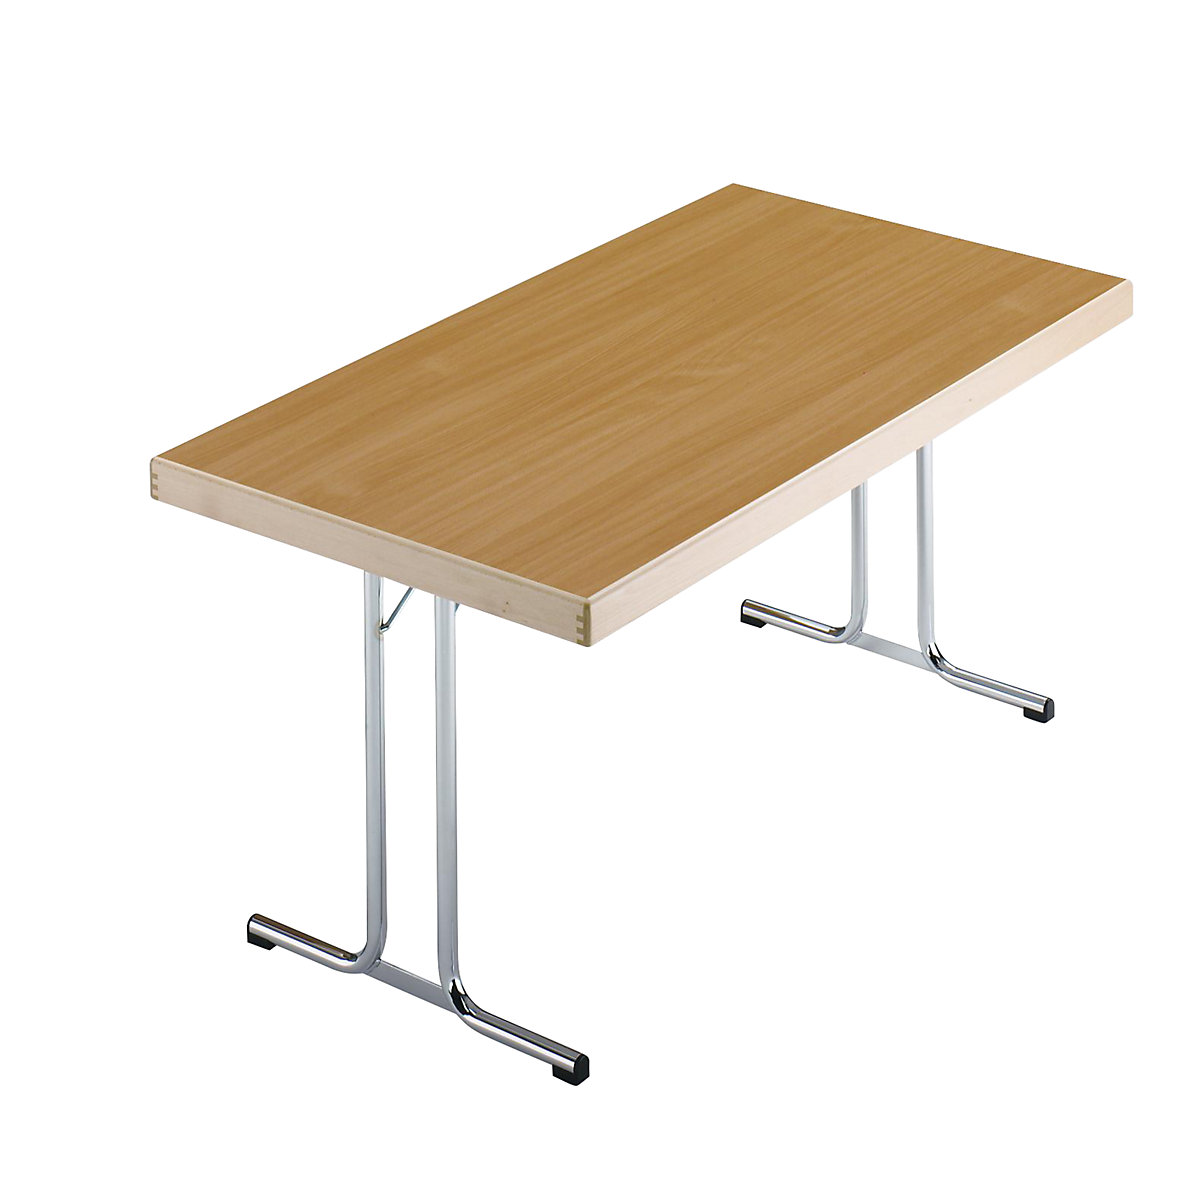 Folding table, double T-foot stand, 1200 x 800 mm, chrome plated frame, beech finish tabletop-14